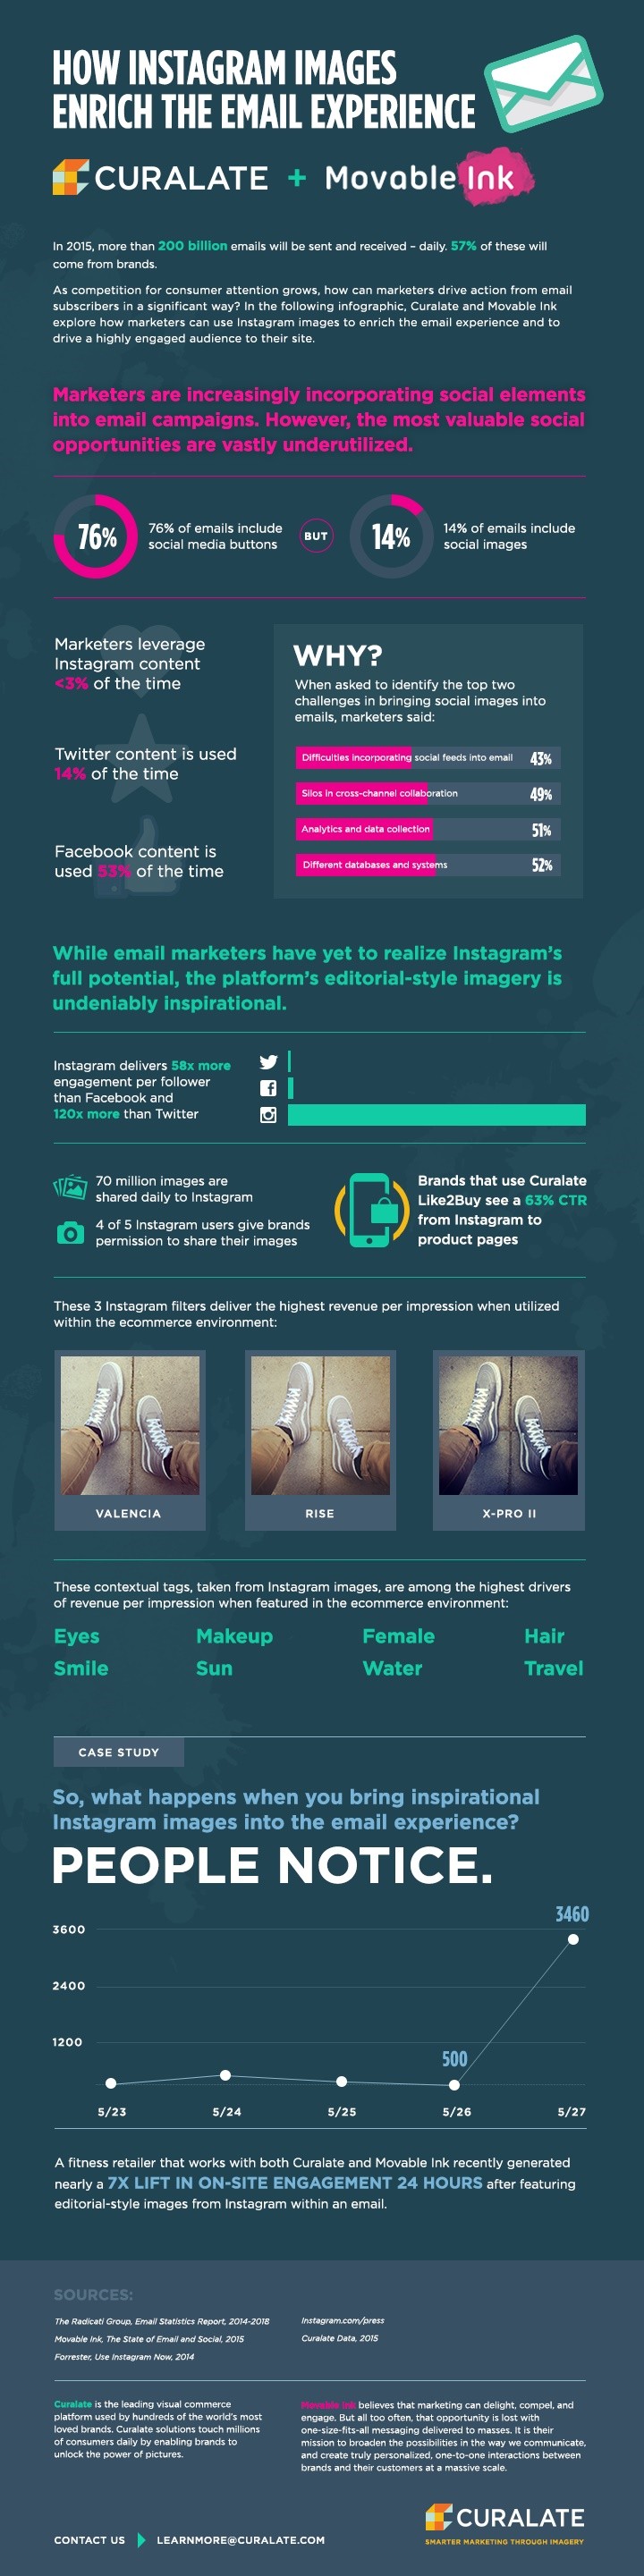 How Instagram Images Enrich the Email Experience 